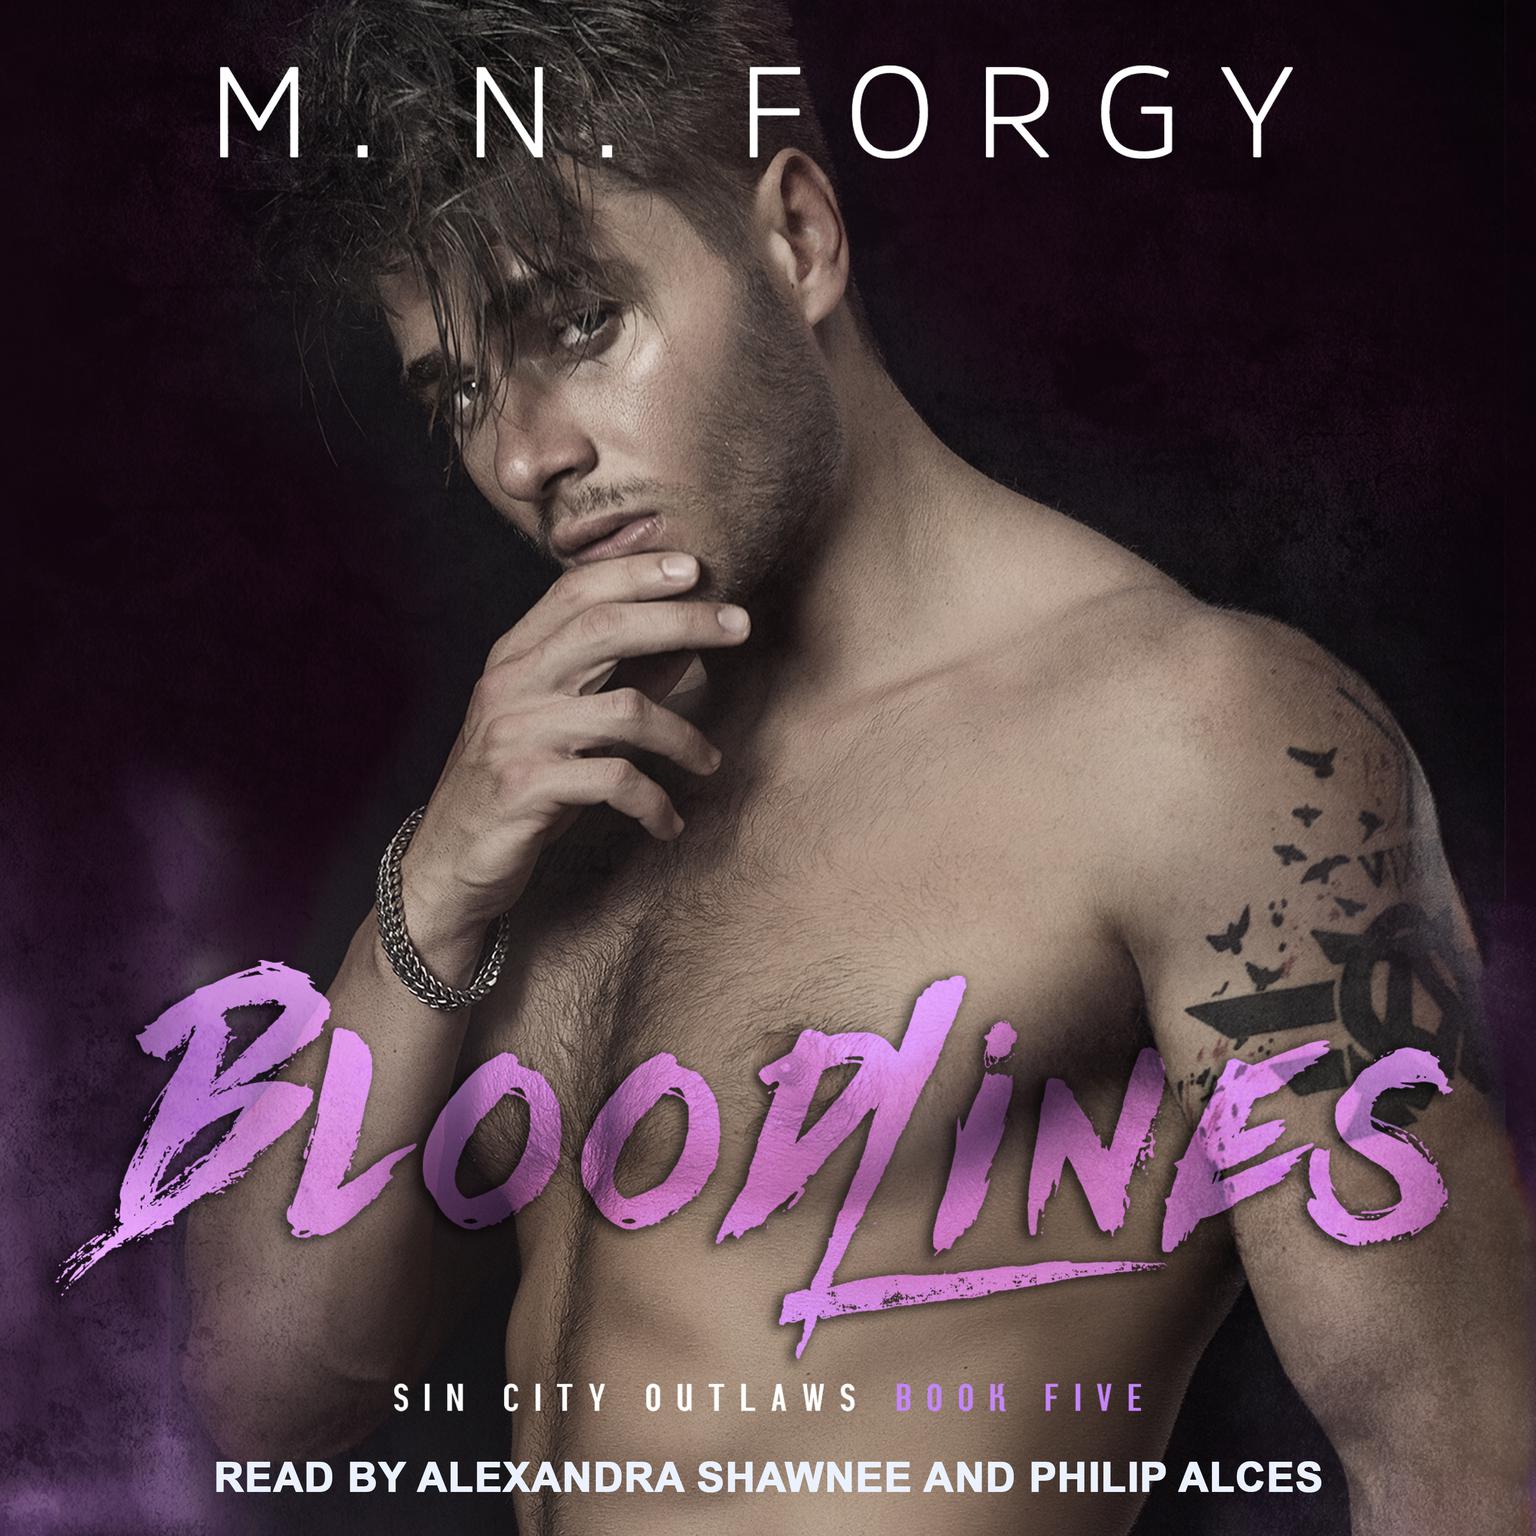 Bloodlines Audiobook, by M. N. Forgy